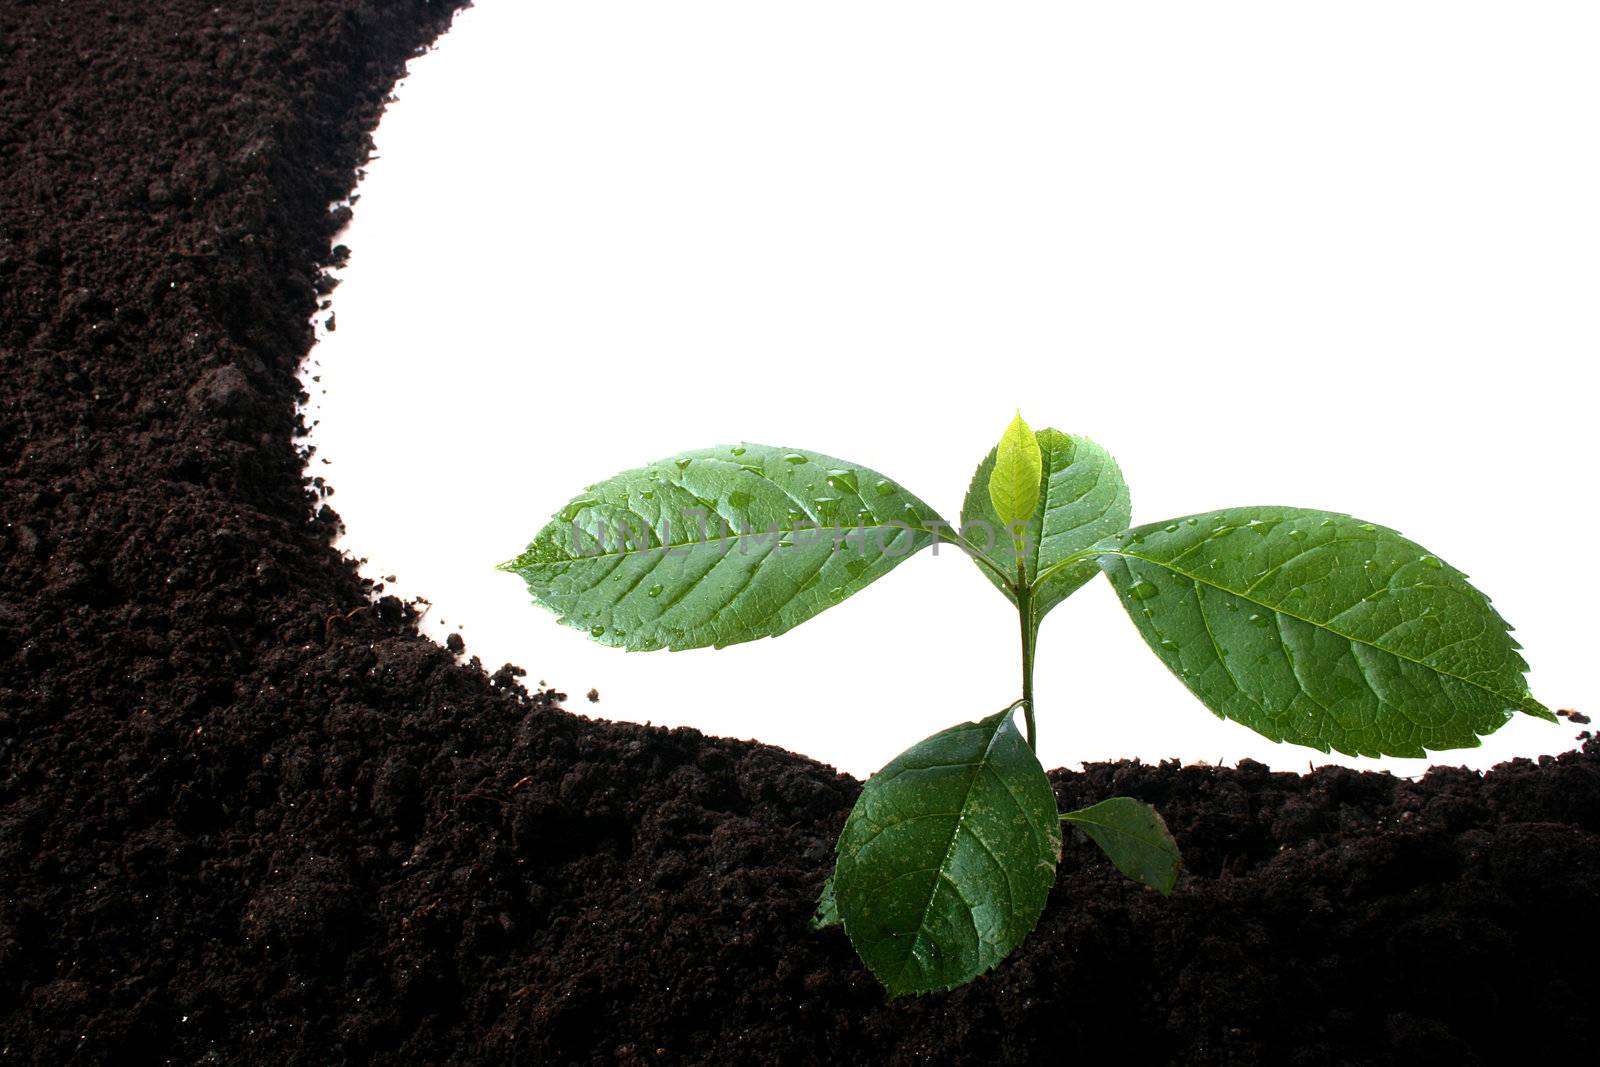 Green sprout on black soil. The soil is located in the form of an ellipse.